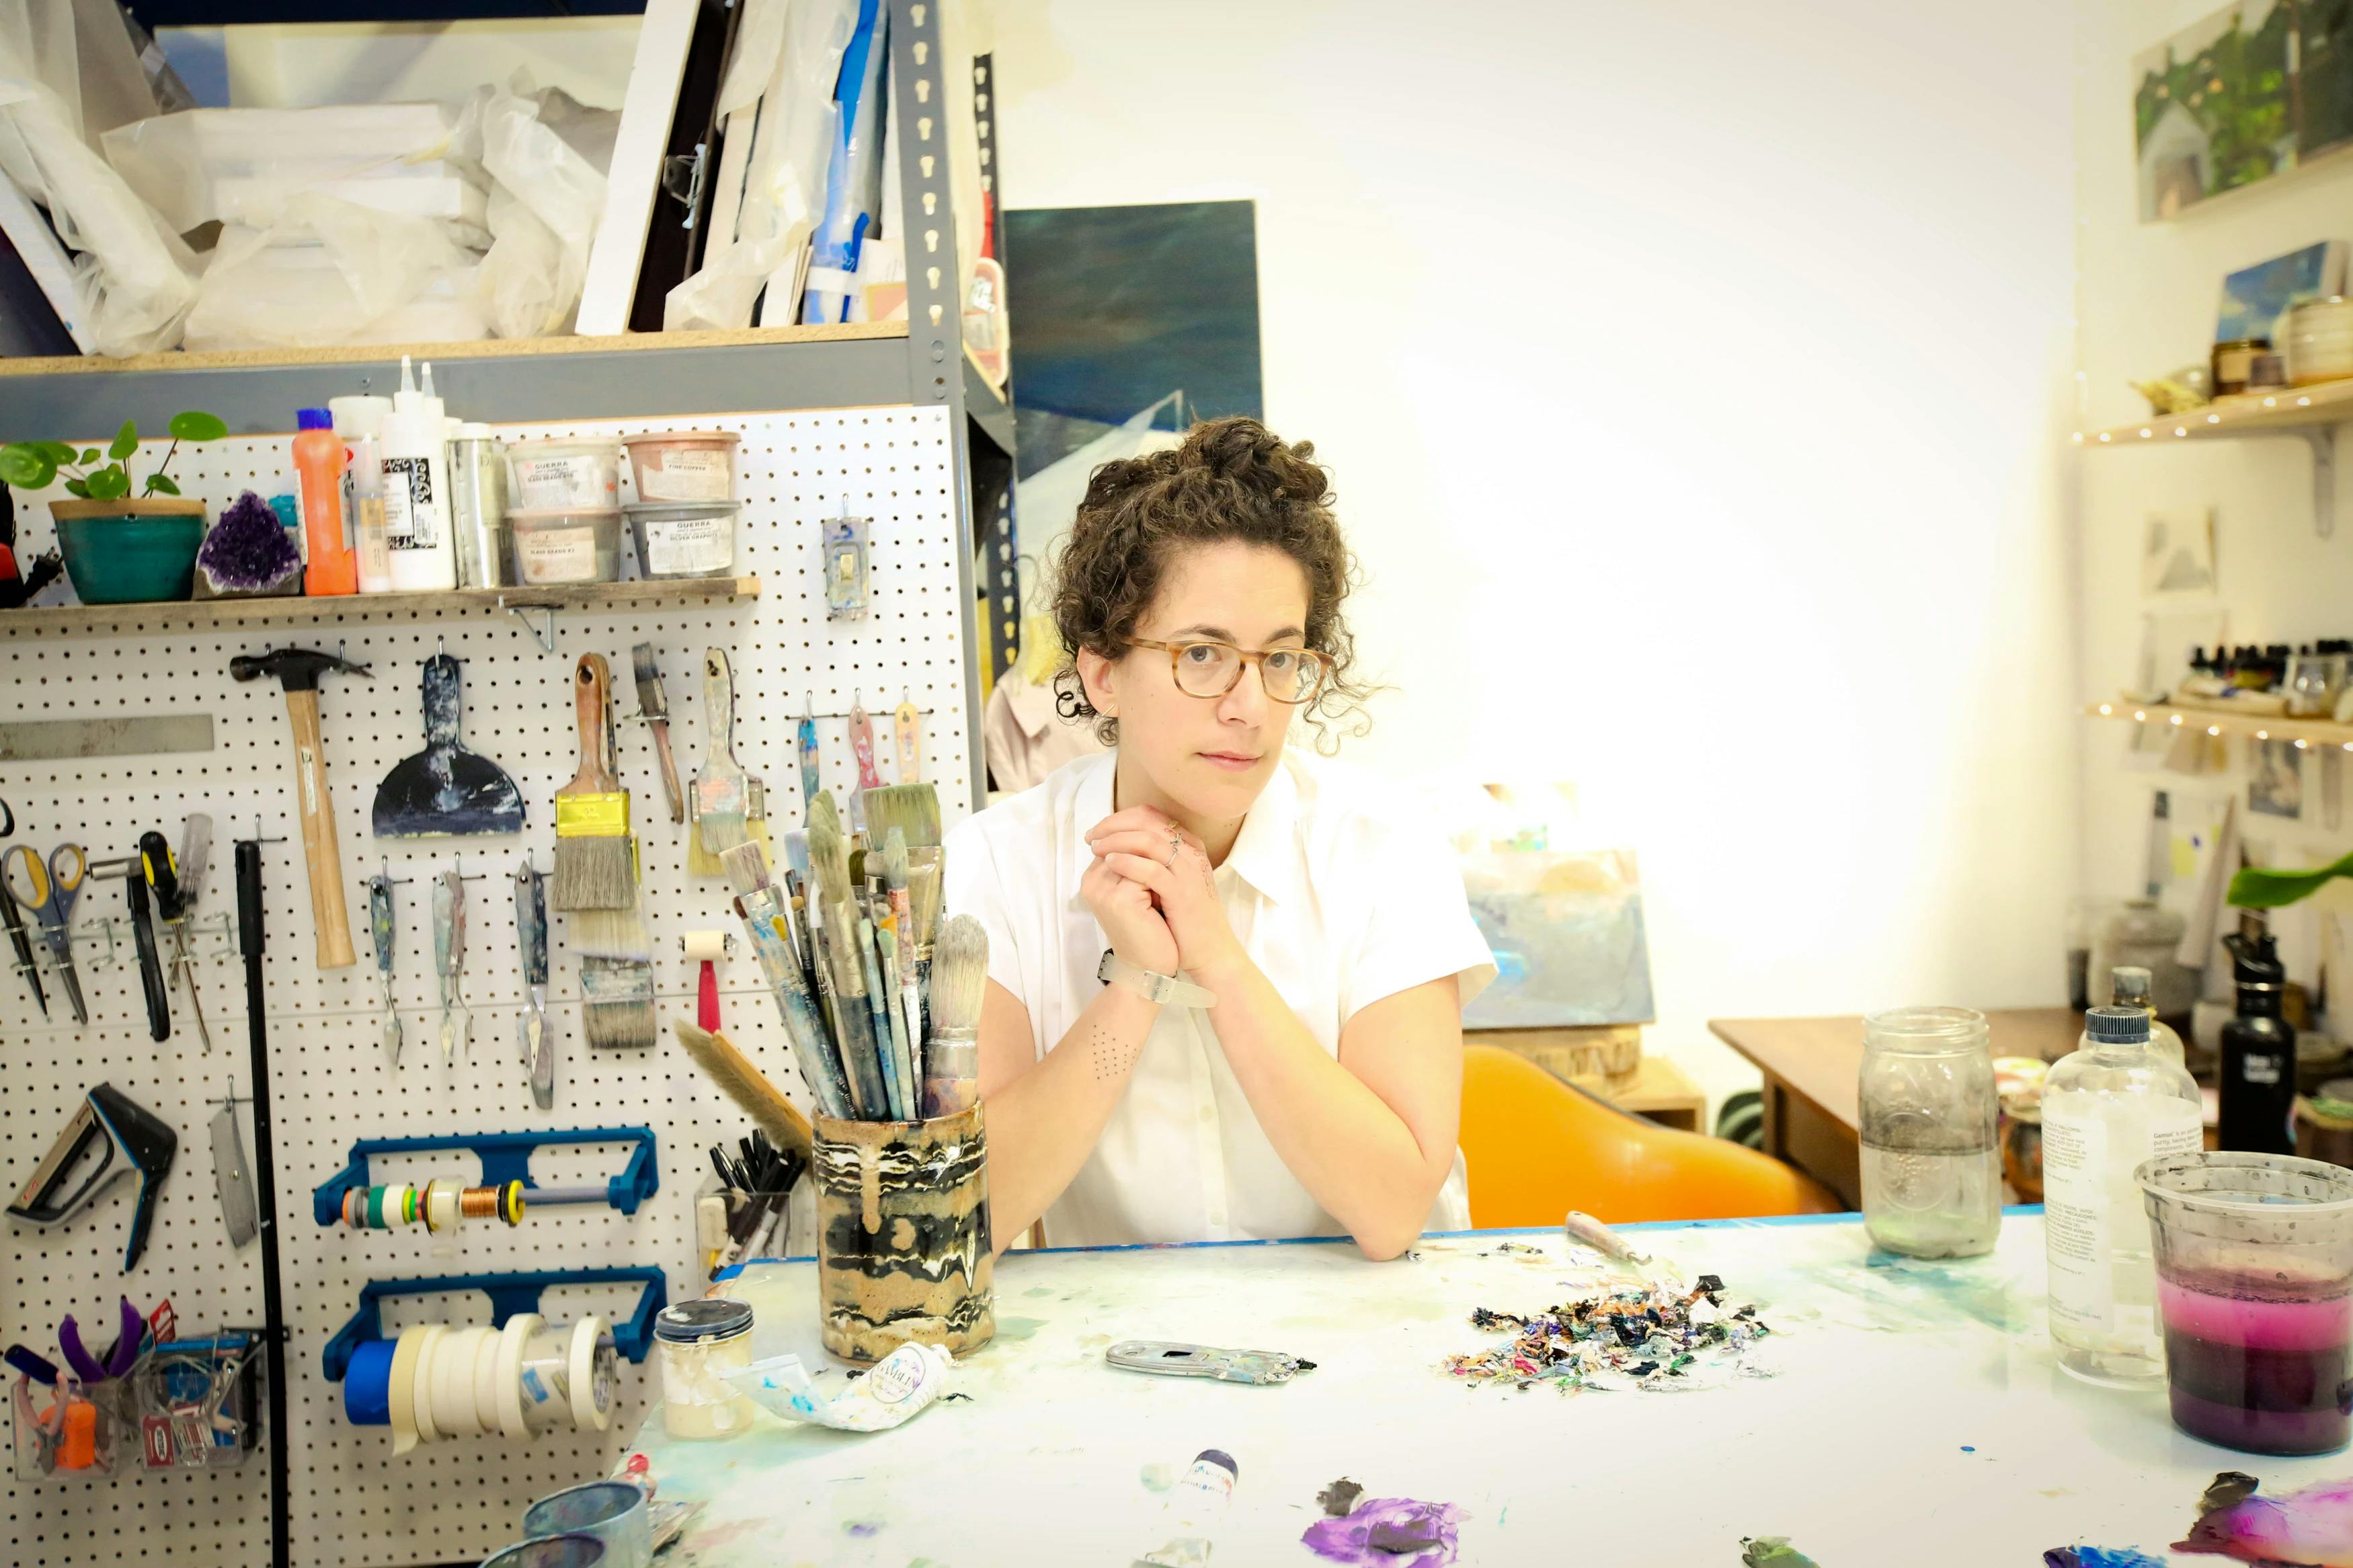 Artist Aliza Cohen wearing a white t-shirt and standing at table inside her studio, surrounded by paintbrushes and other tools.